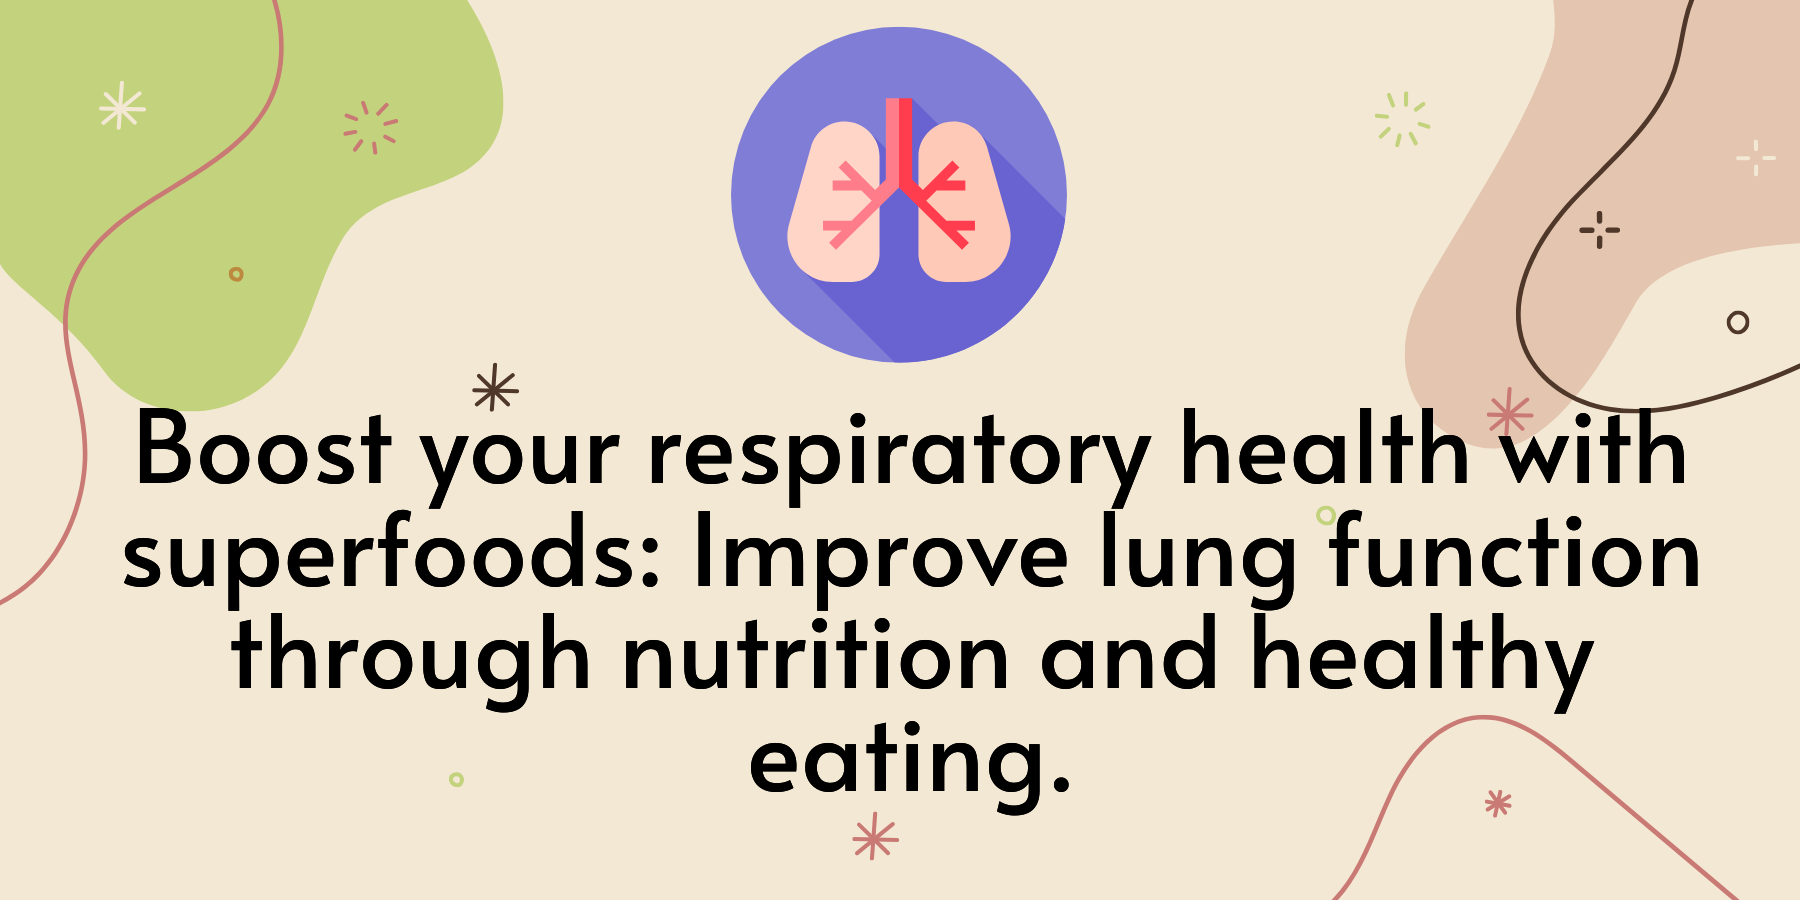 superfoods-lung-health-enhance-respiratory-wellbeing-nutrition-healthy-eating